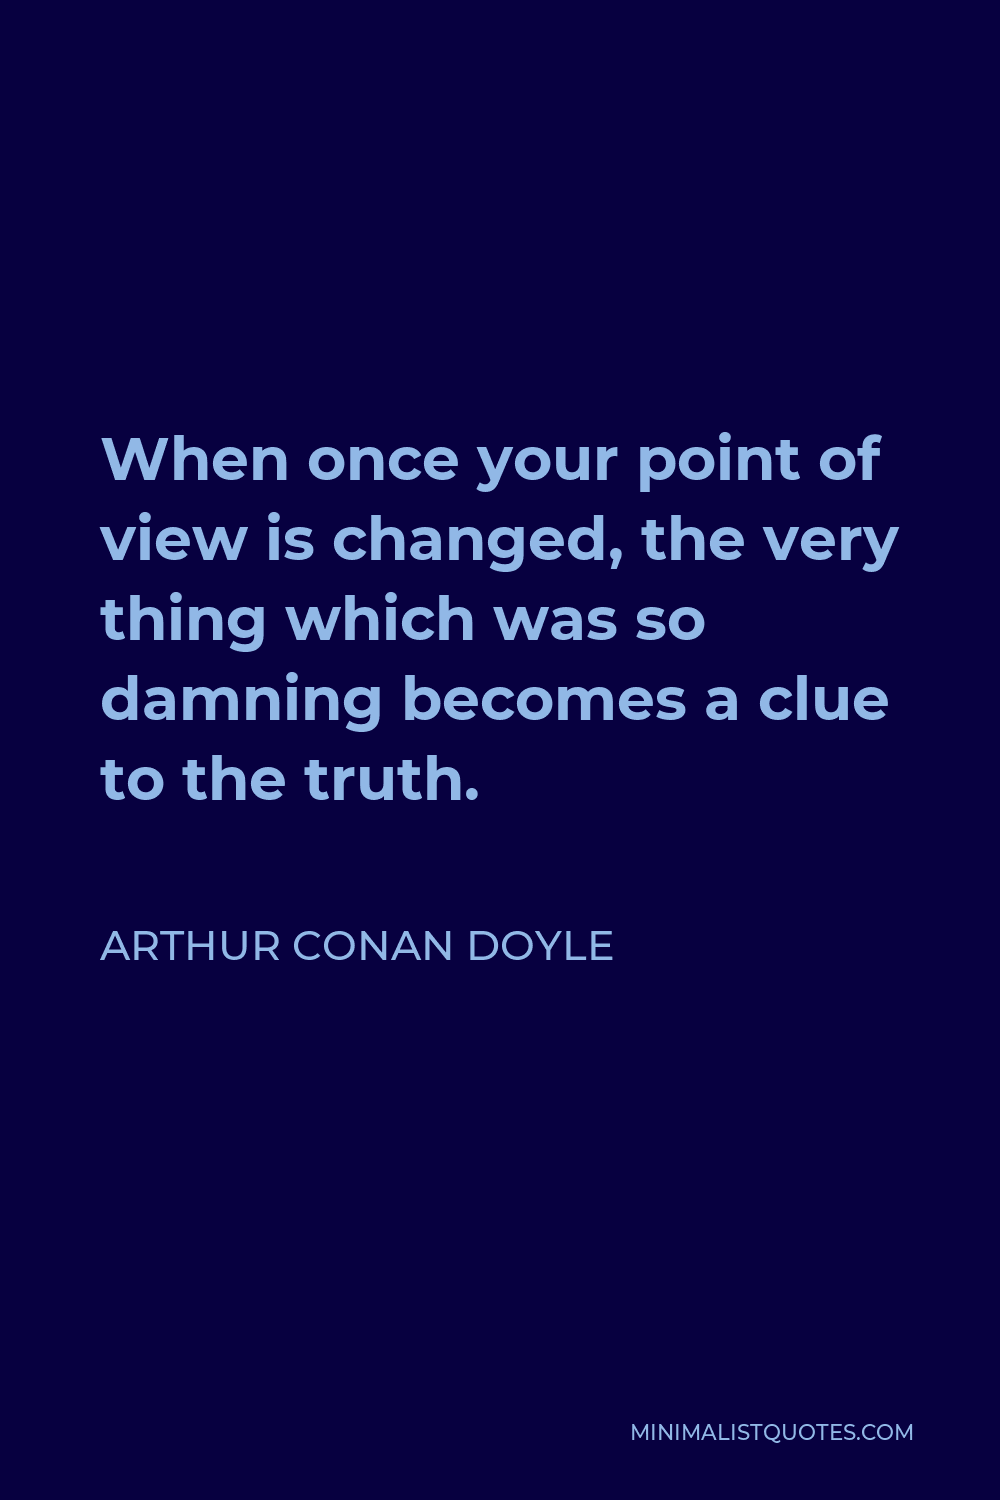 Arthur Conan Doyle Quote - When once your point of view is changed, the very thing which was so damning becomes a clue to the truth.